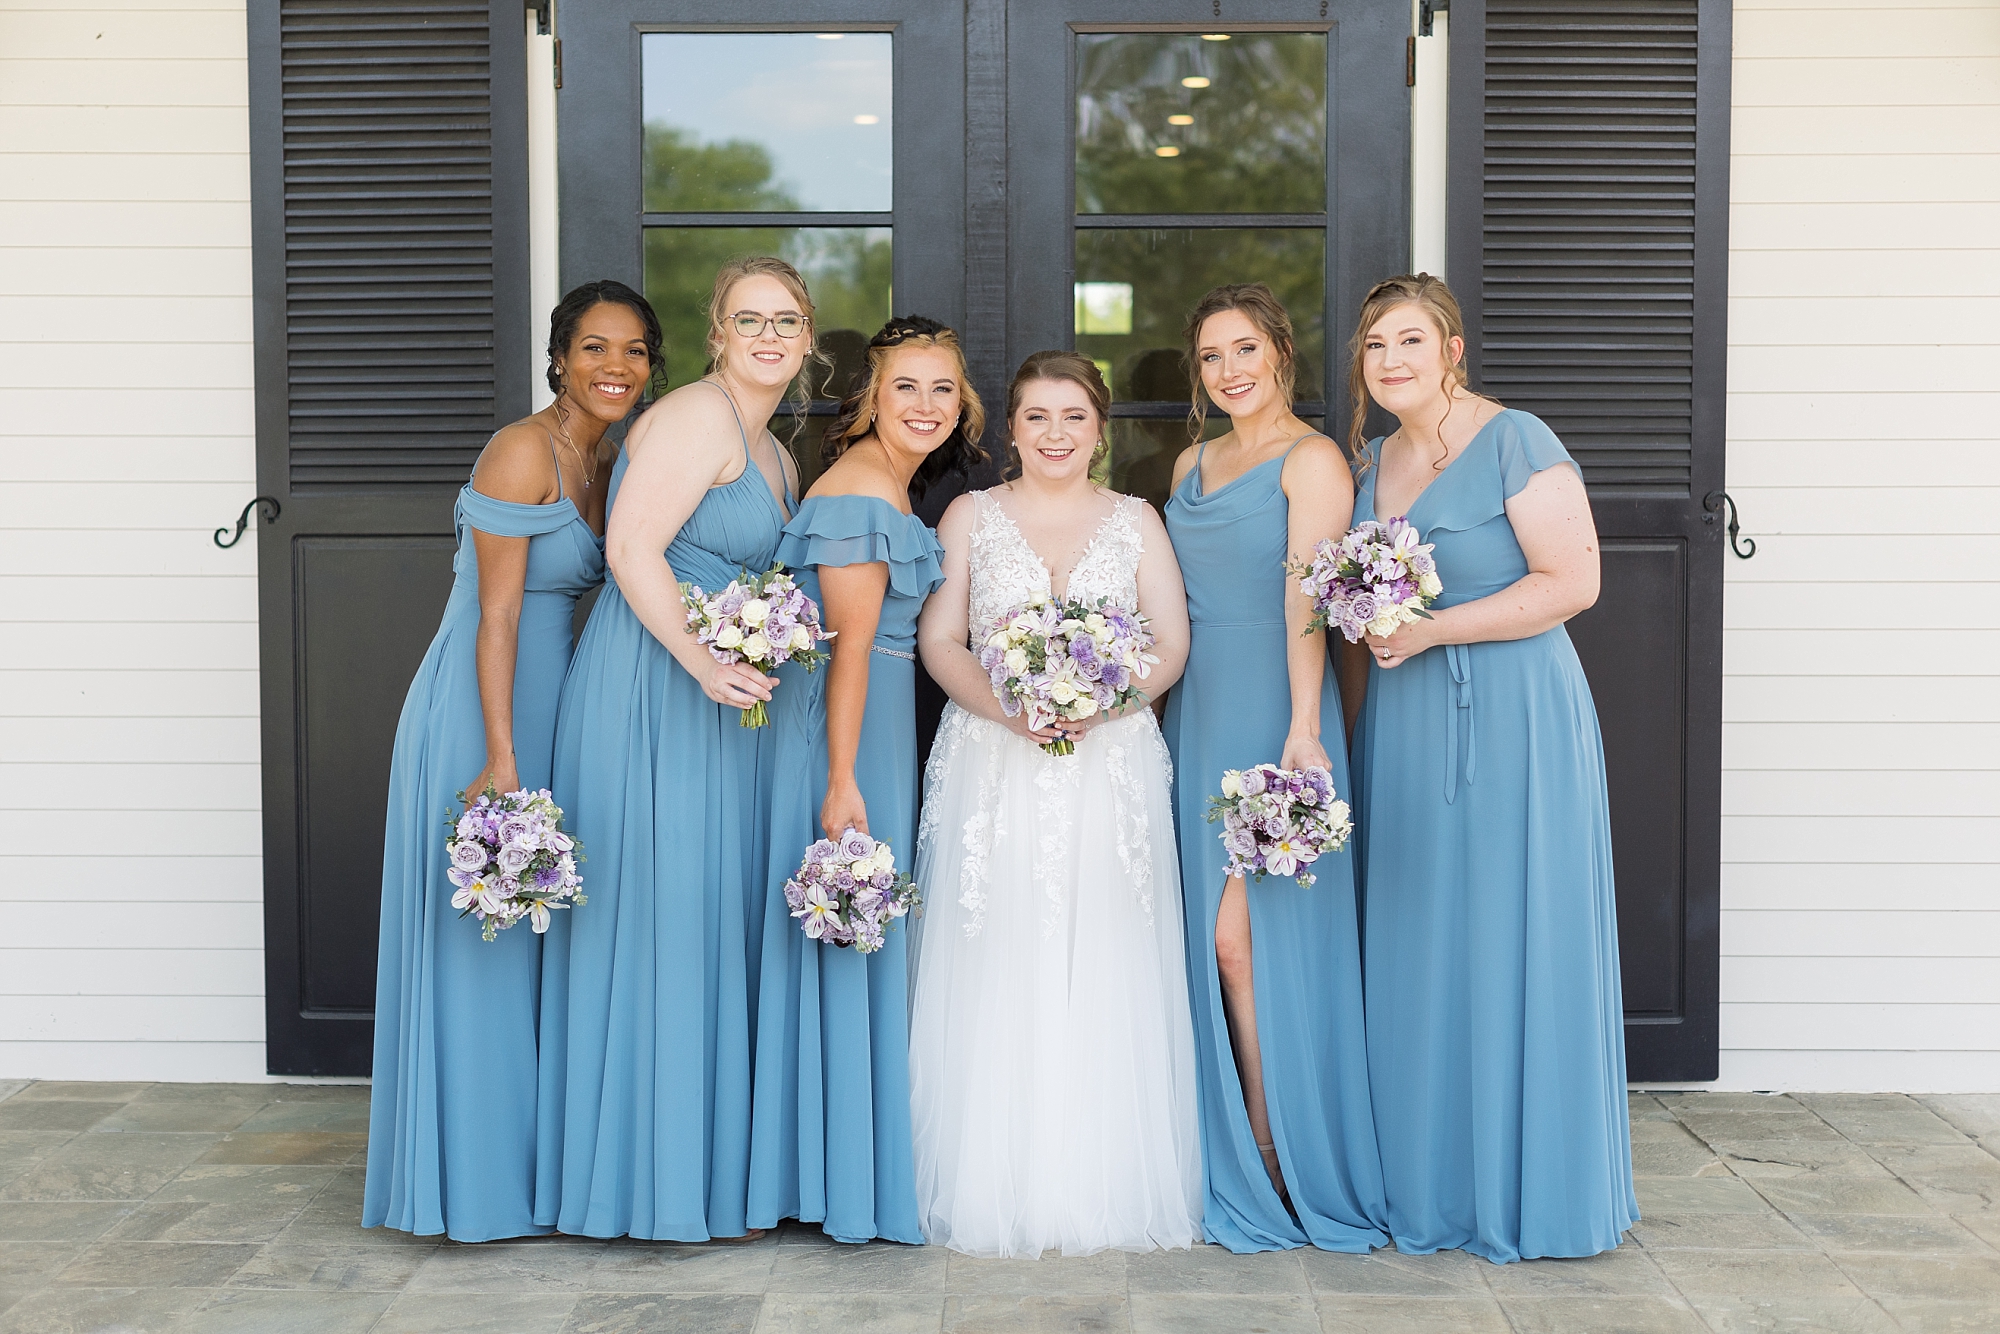 Bride with her bridal party in blue dresses - Raleigh NC Wedding Photographer - Sarah Hinckley Photography